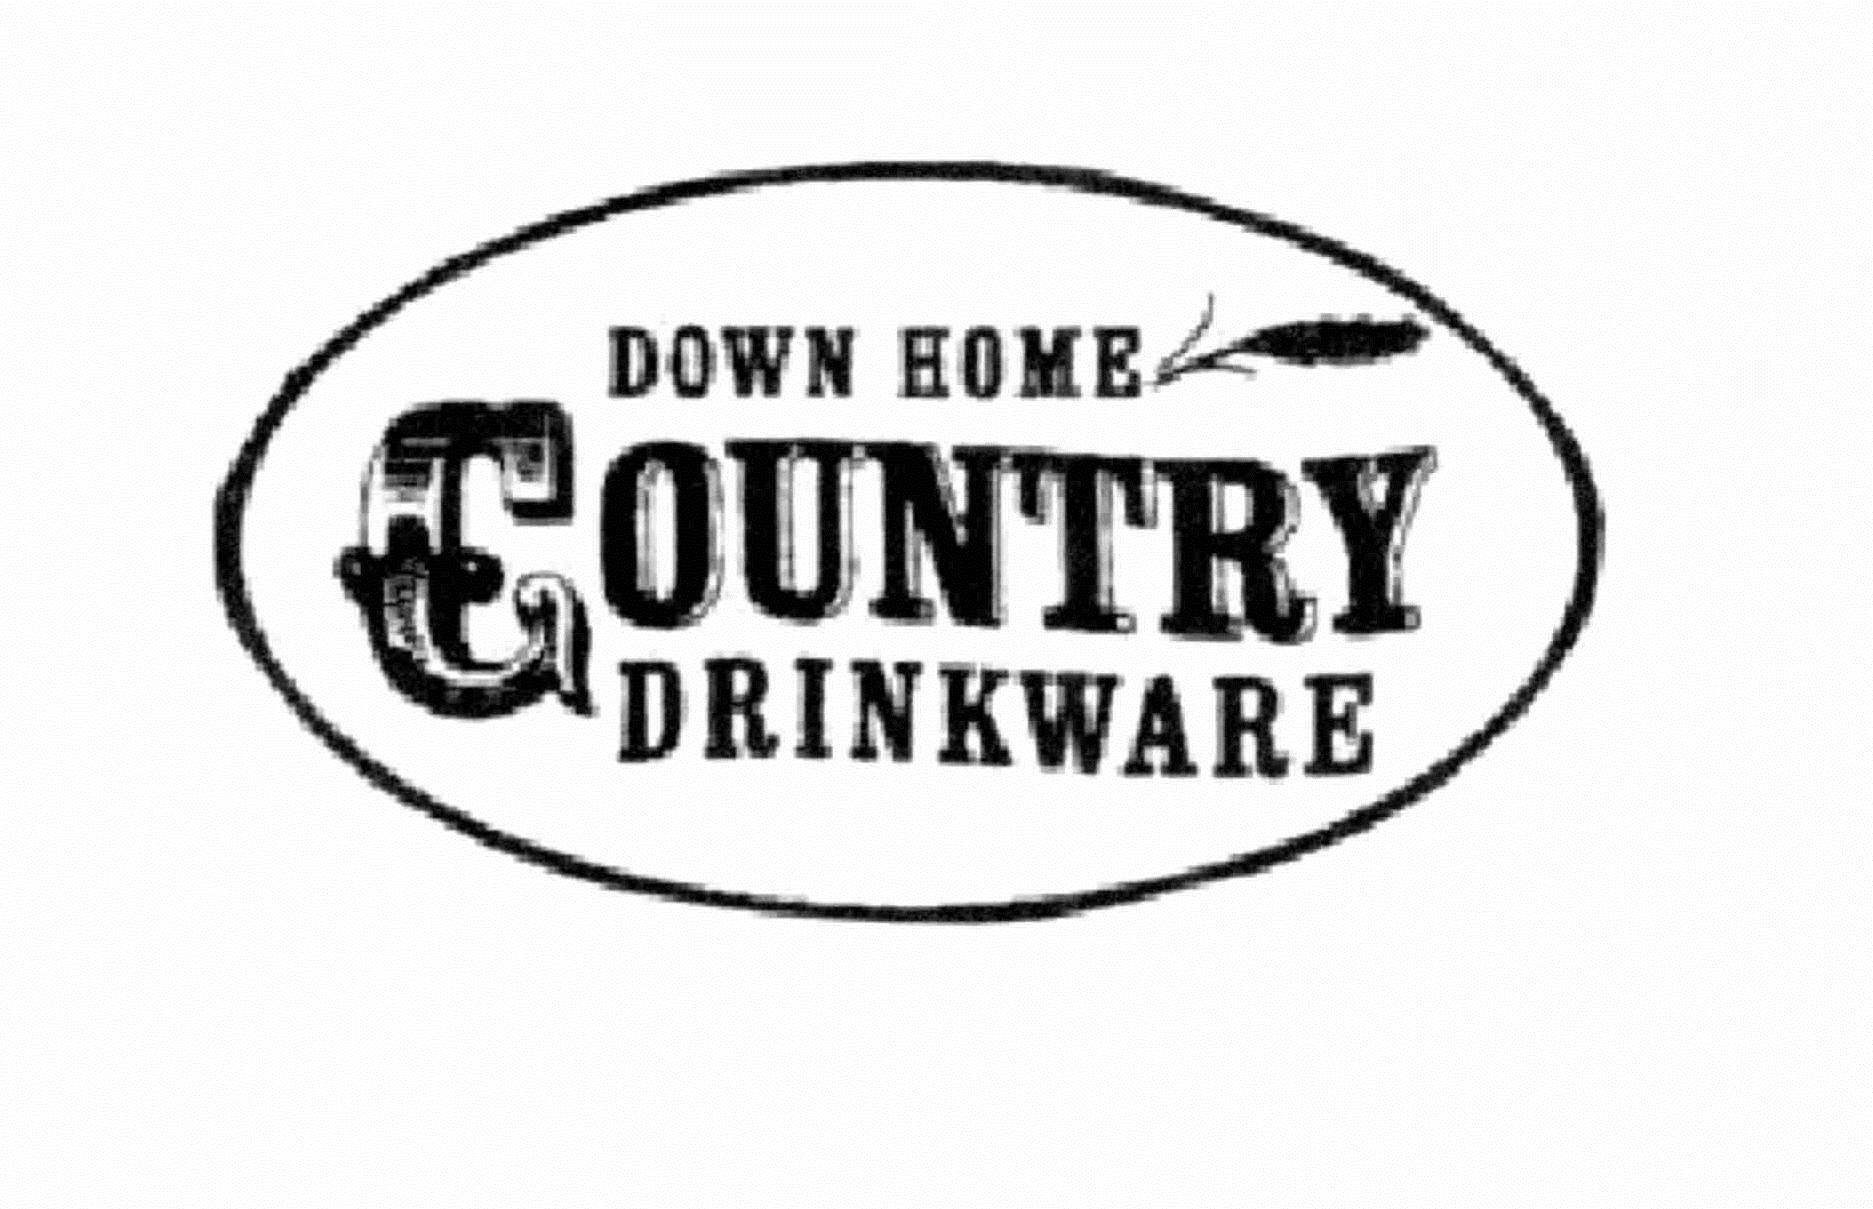  DOWN HOME COUNTRY DRINKWARE